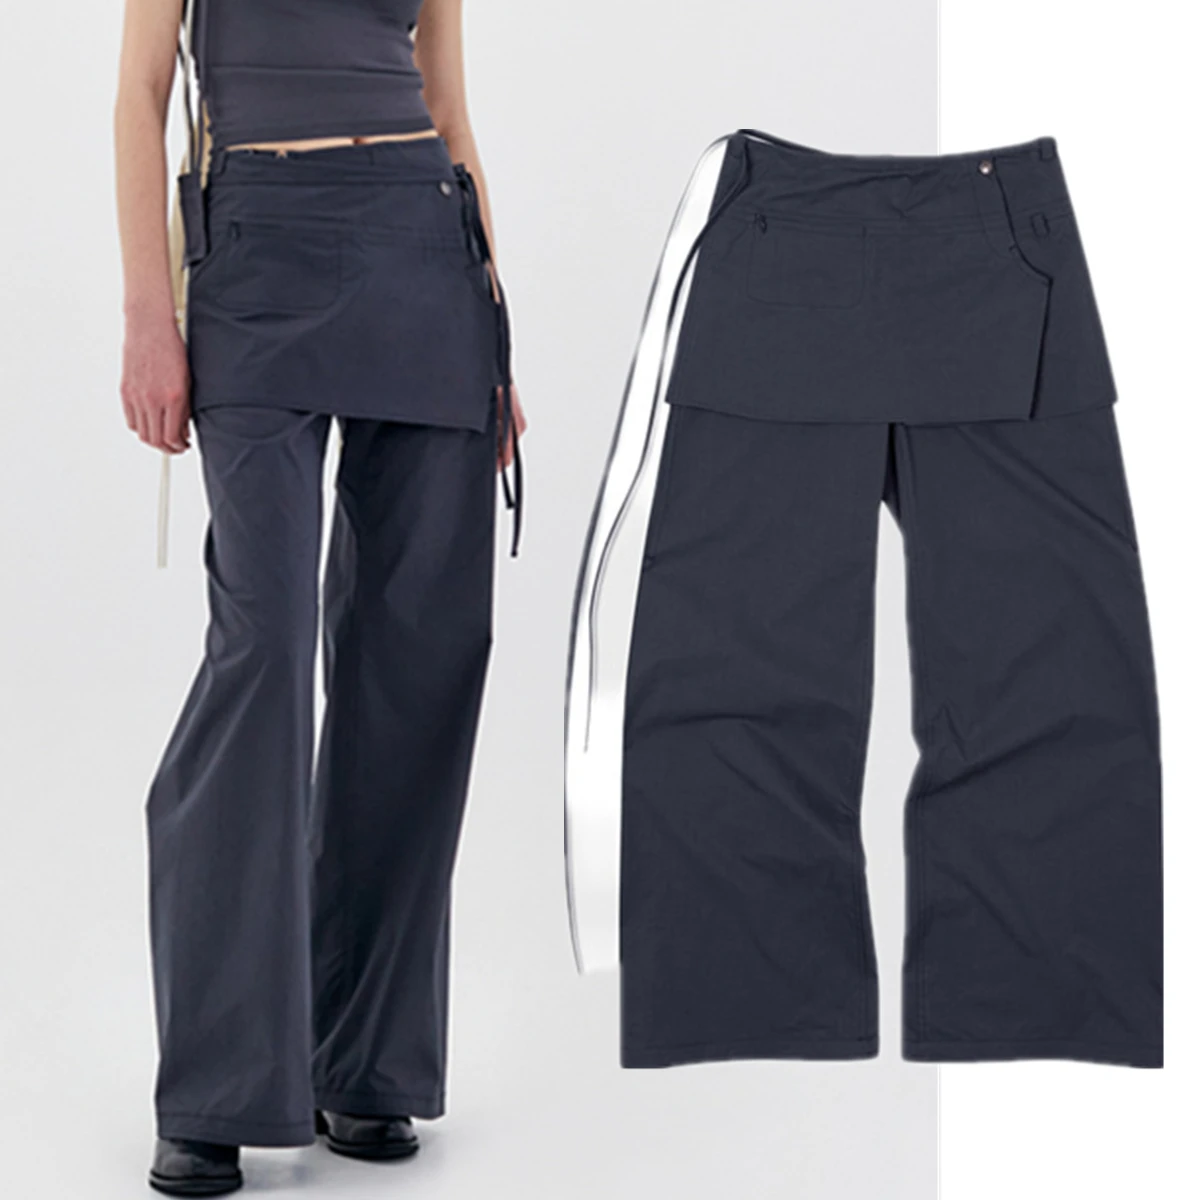 

Jenny&Dave Fashion Minimalist Retro Design Trousers For Women Culotte High Waisted Straight Leg Casual Pants Women